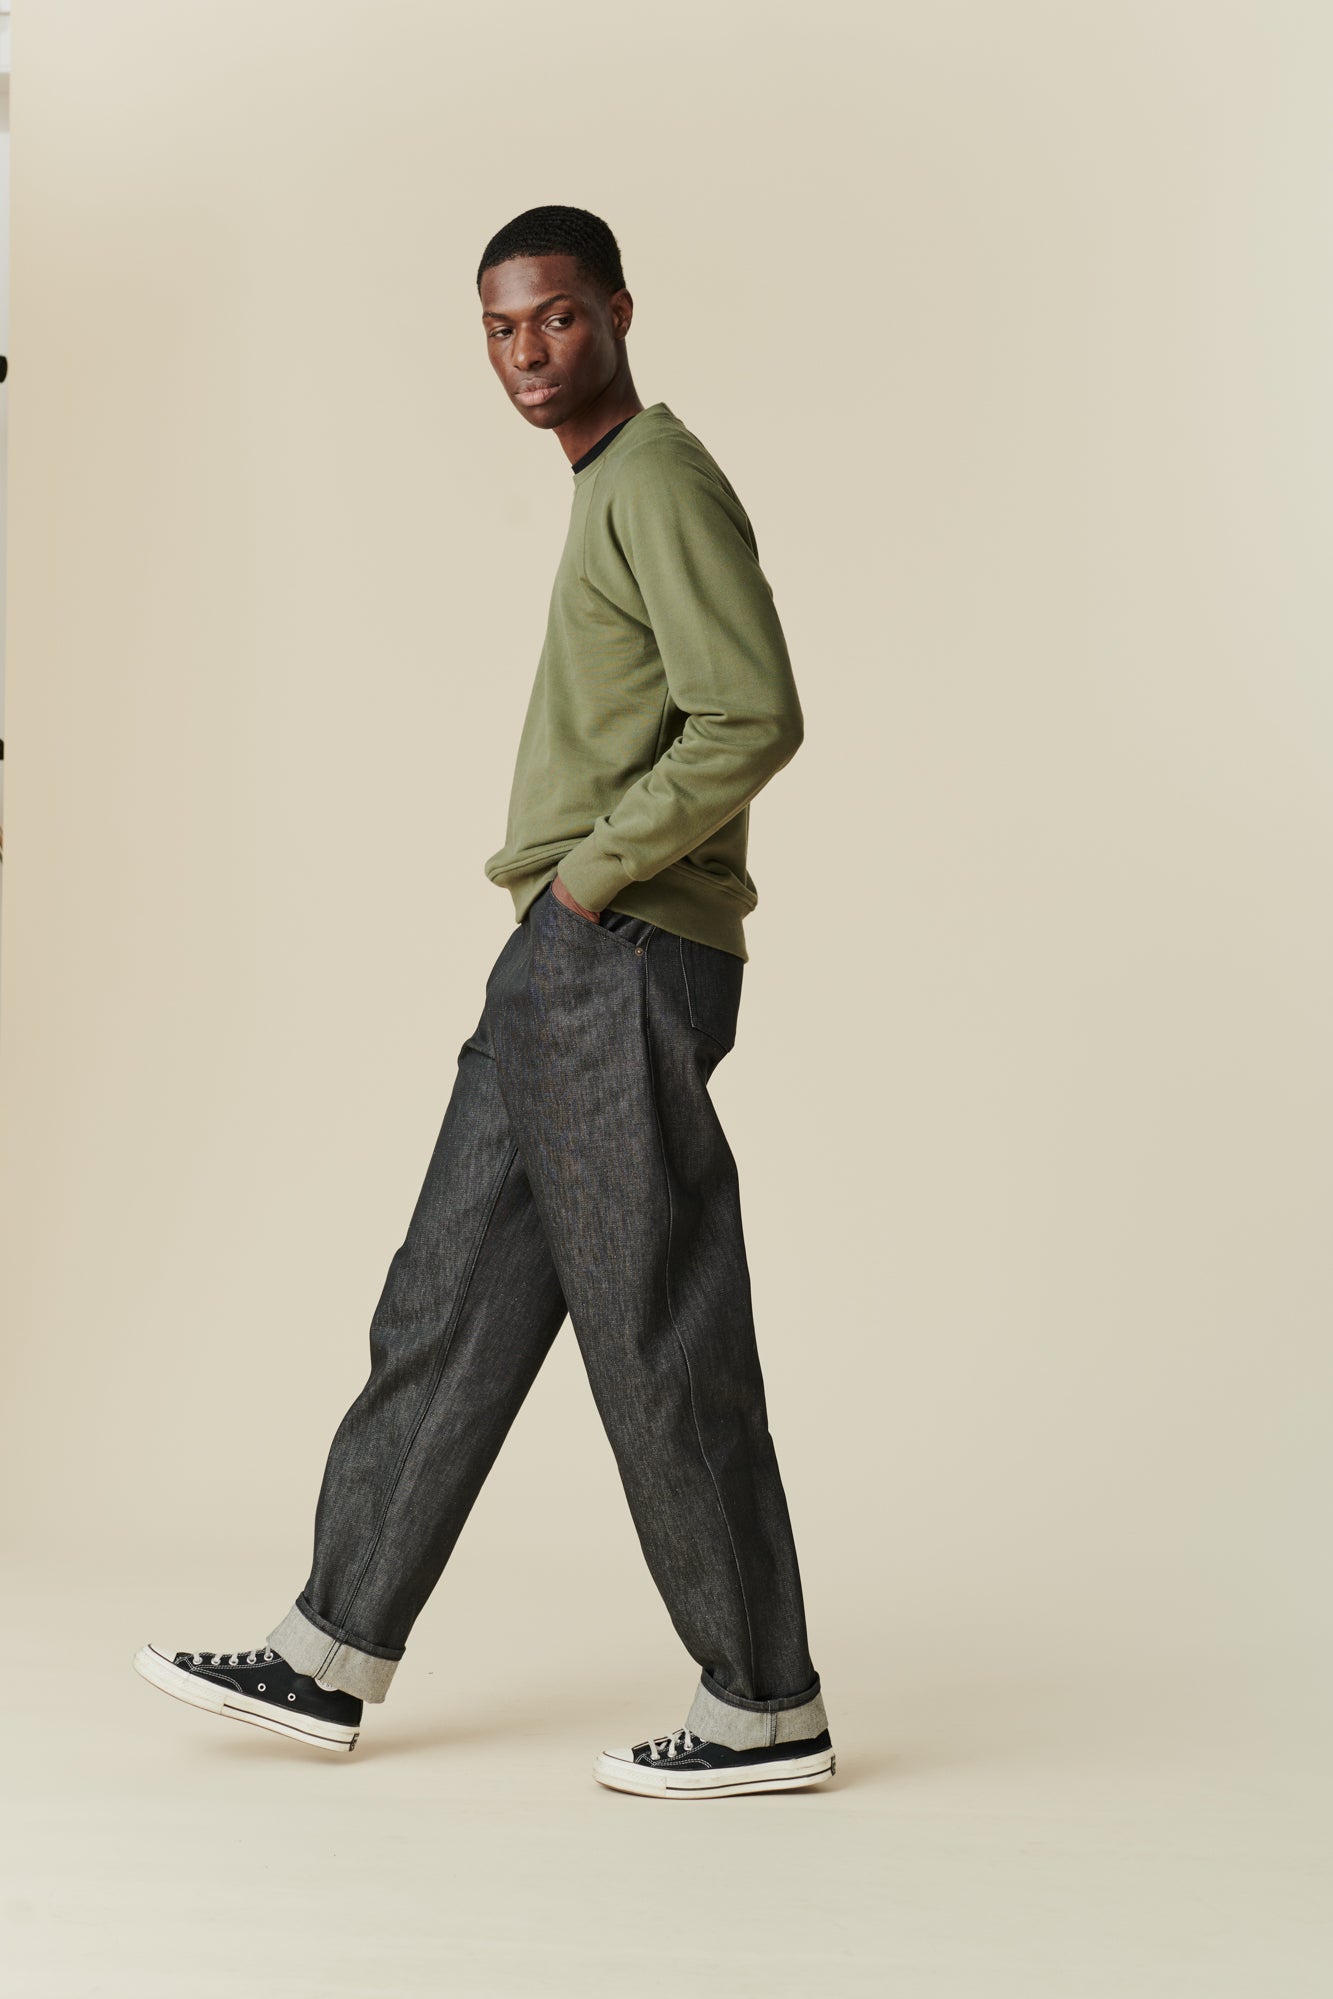 Side angle full body image of black male wearing men's Chore jeans in black, wide leg and tapered fit with rolled hem, worn with olive green raglan sweatshirt